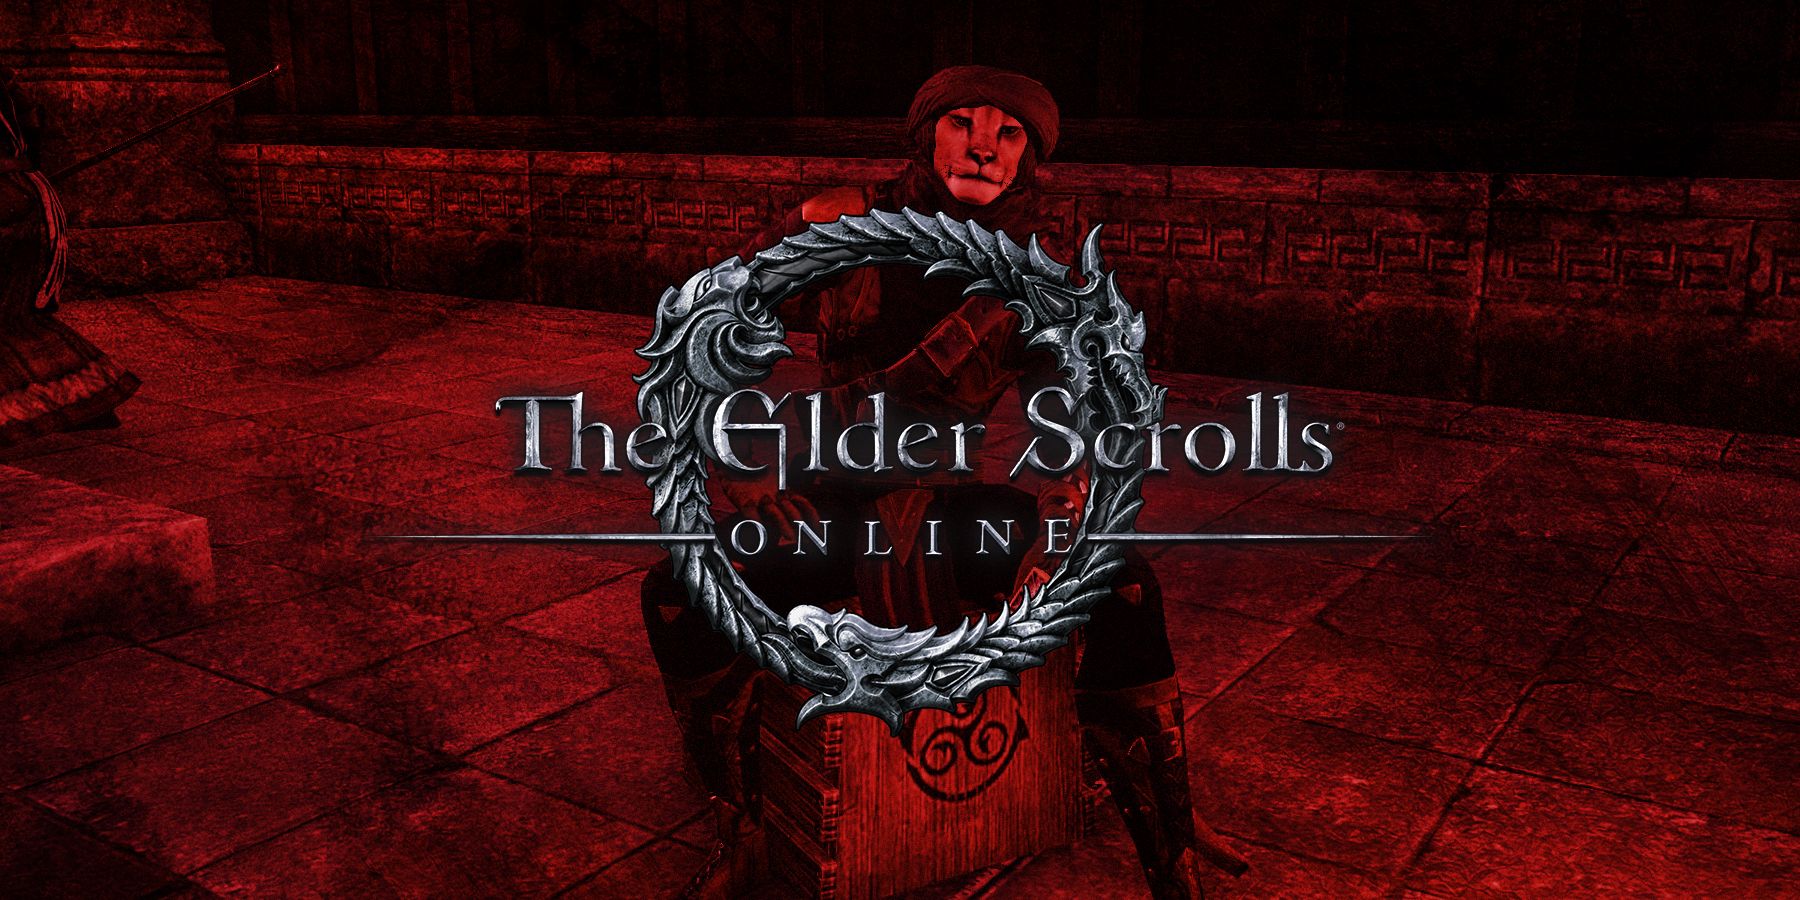 eso elder scrolls online black friday special offer value players not happy crown store